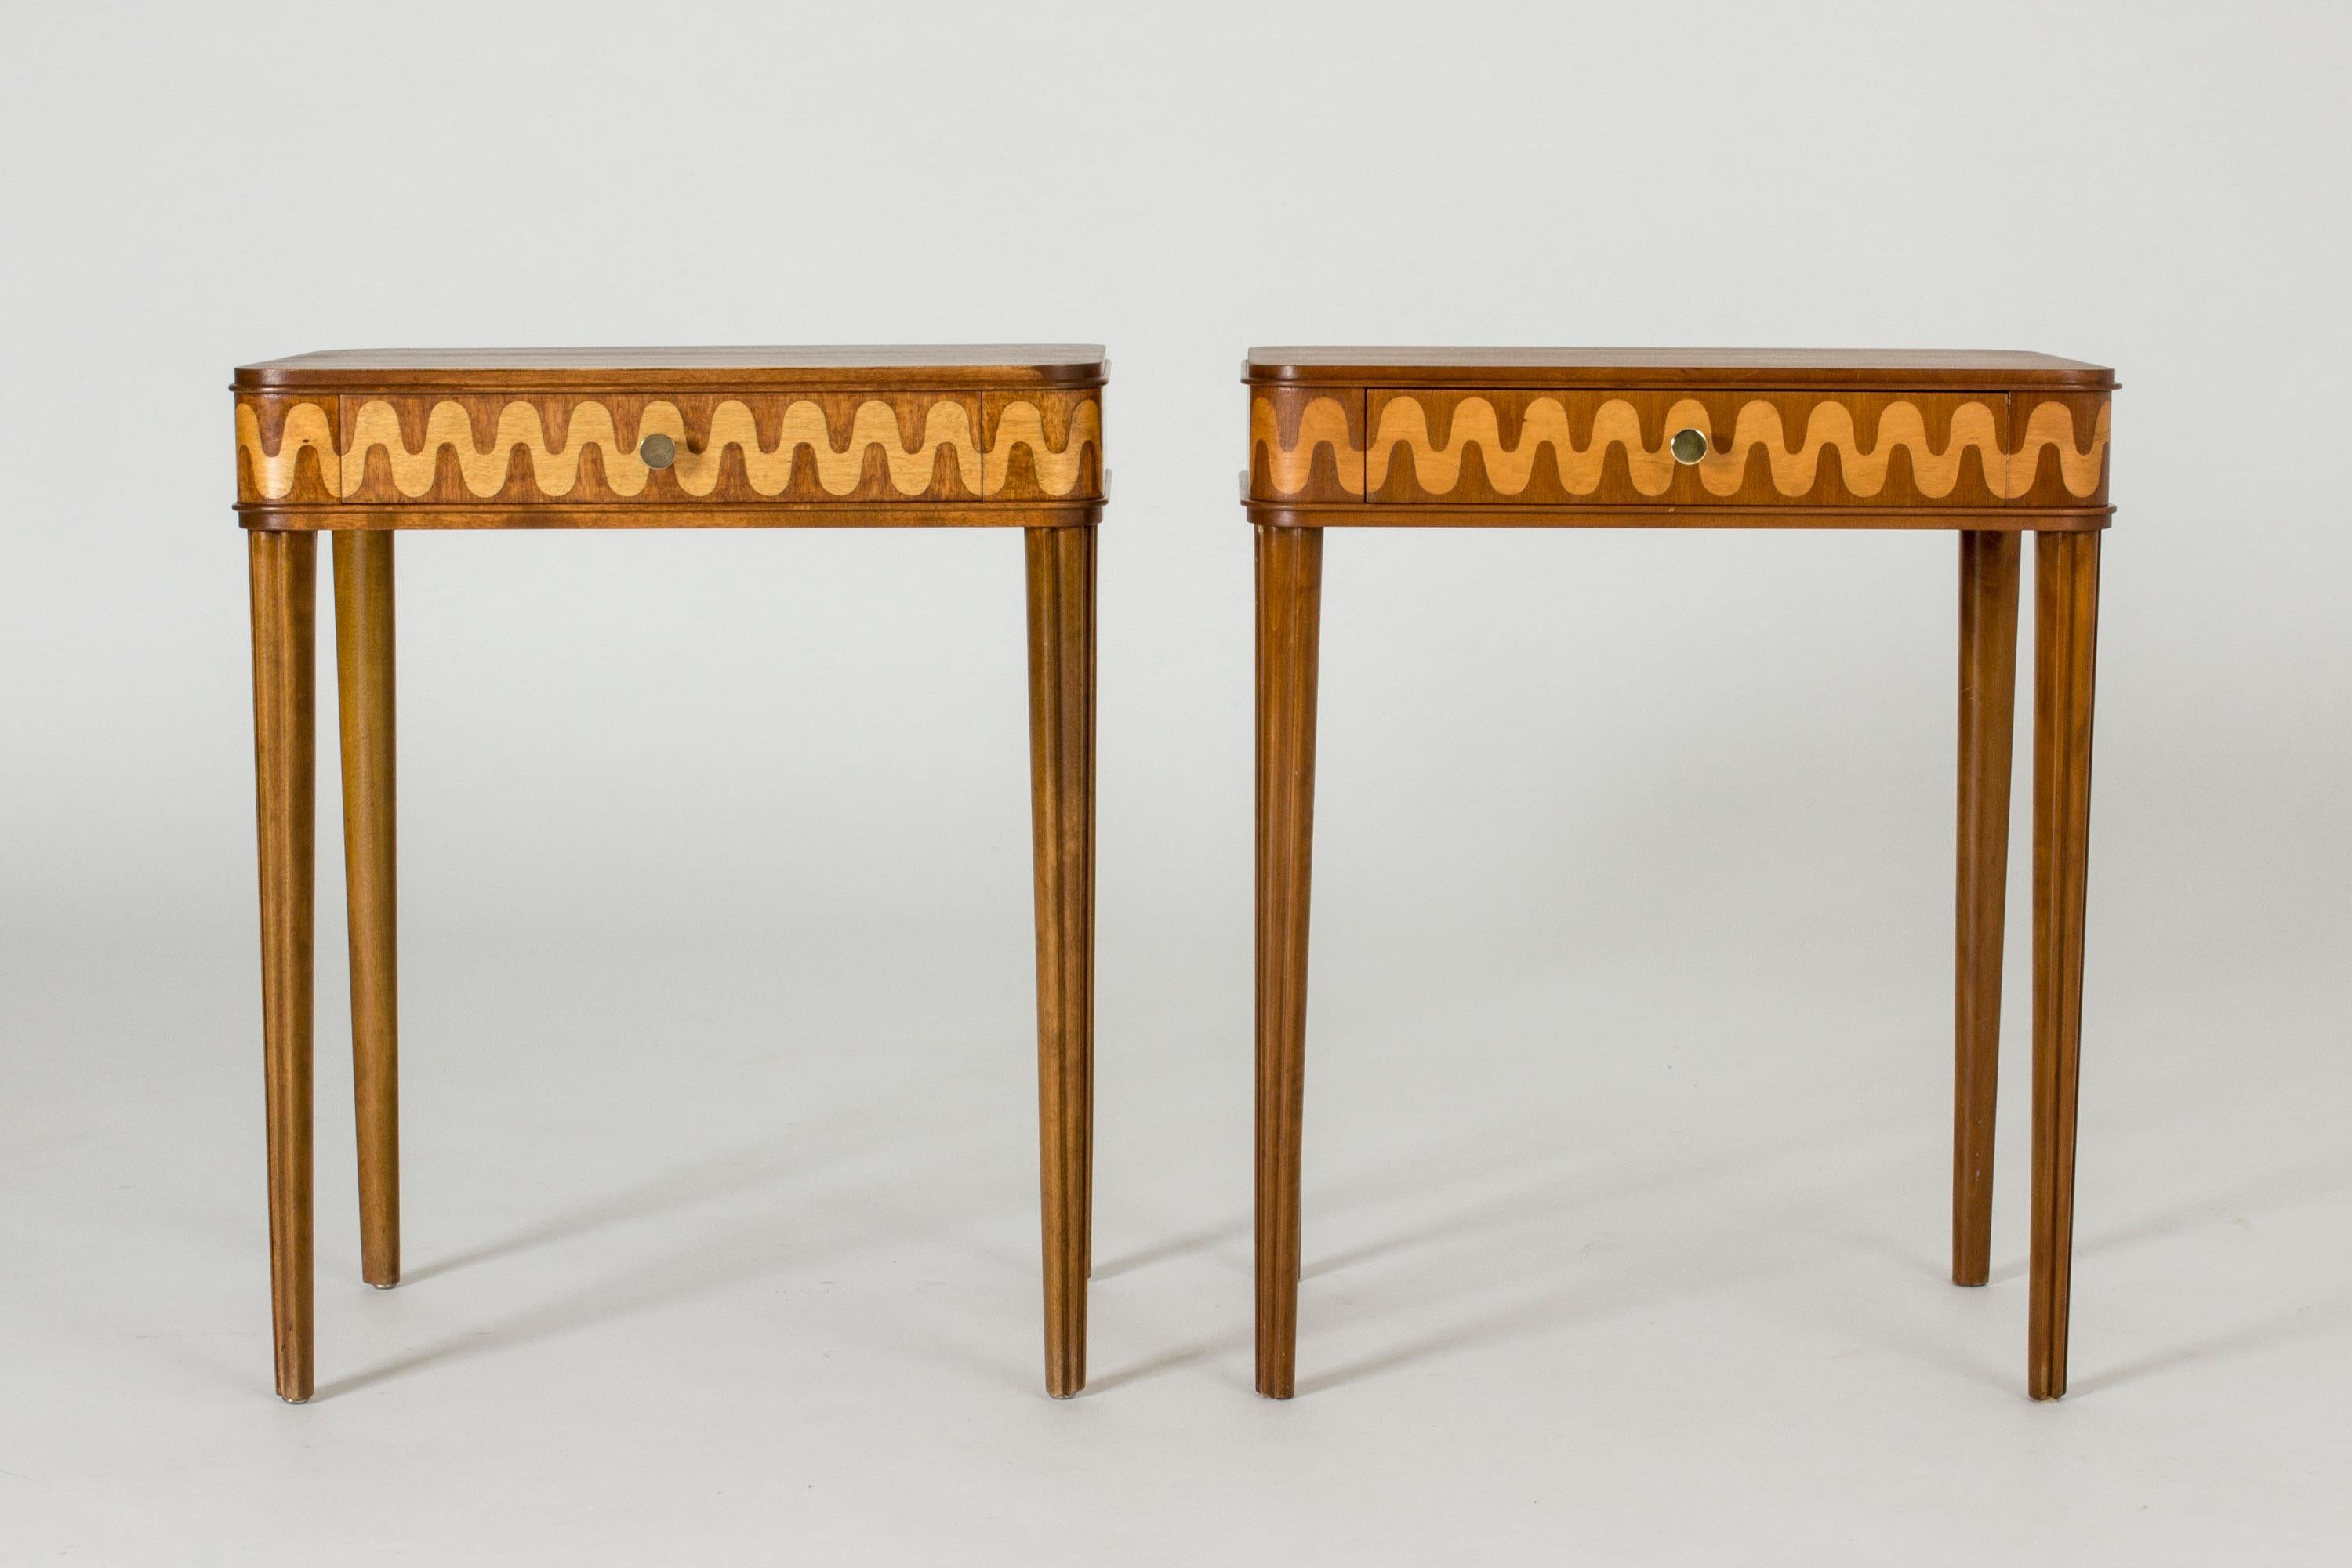 Pair of beautiful bedside tables from NK, with slender tapering legs and drawers with wavy inlays in a lighter wood. This is a married couple, made from different kinds of wood which shows in the different looks of the woodgrain.